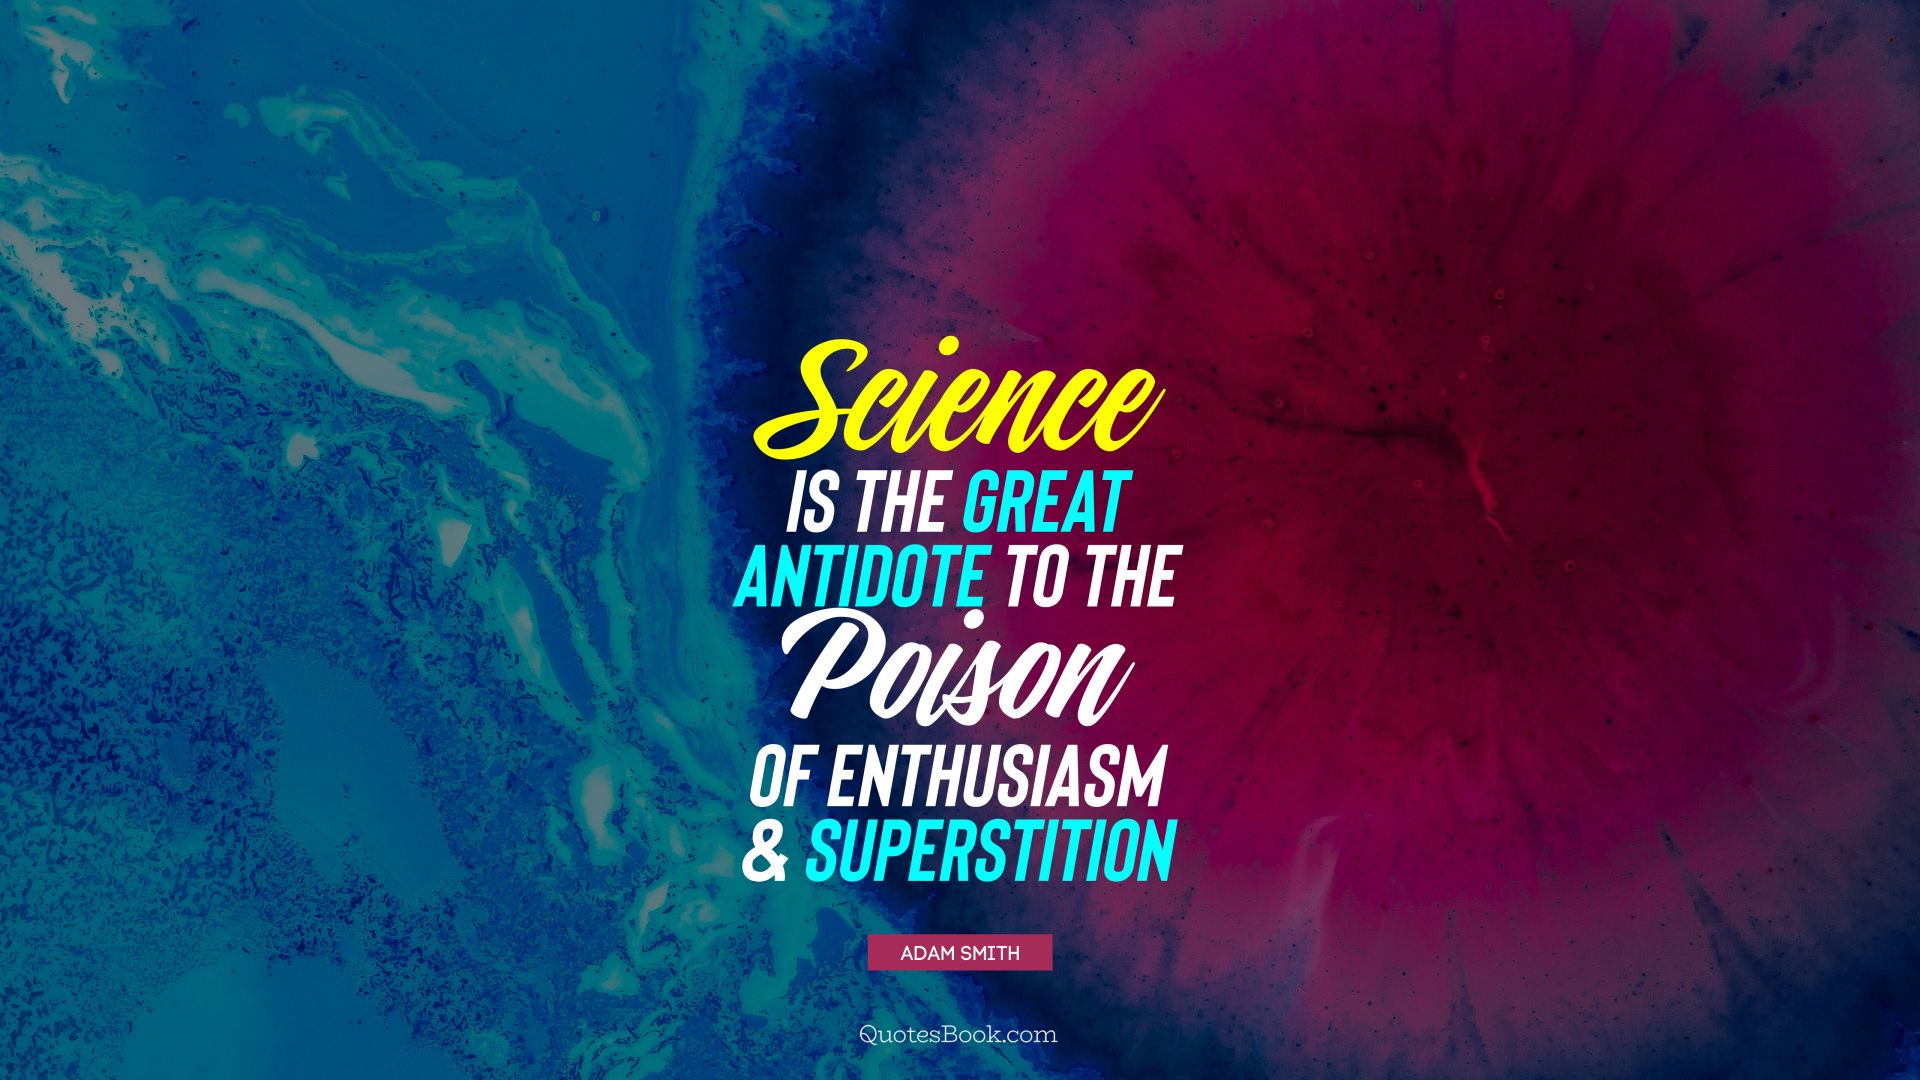 Science is the great antidote to the poison of enthusiasm and superstition. - Quote by Adam Smith